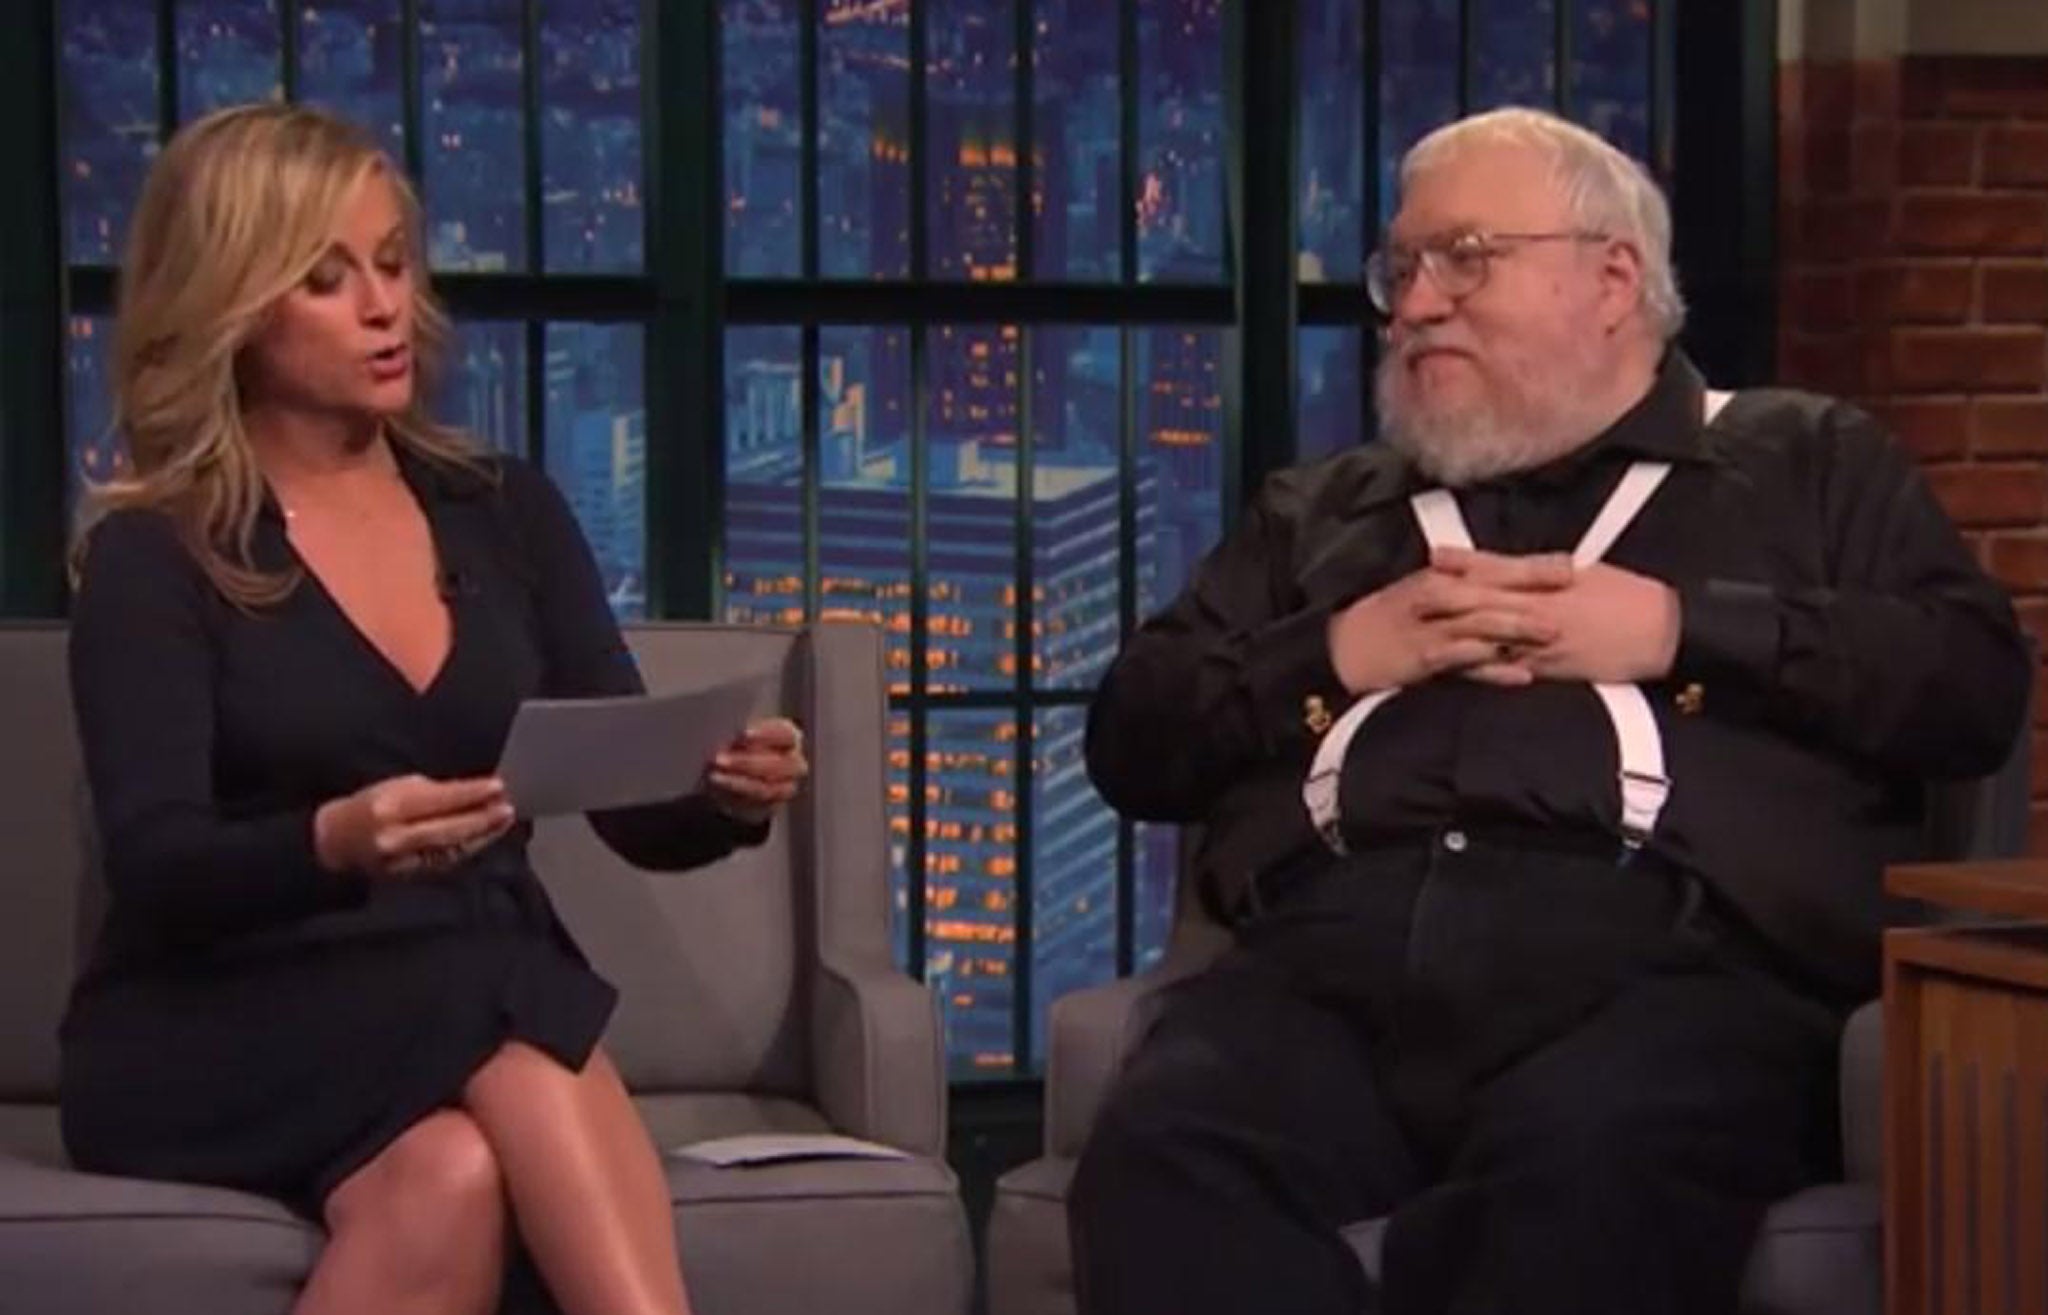 Amy Poehler questions George RR Martin's knowledge on Late Night with Seth Meyers